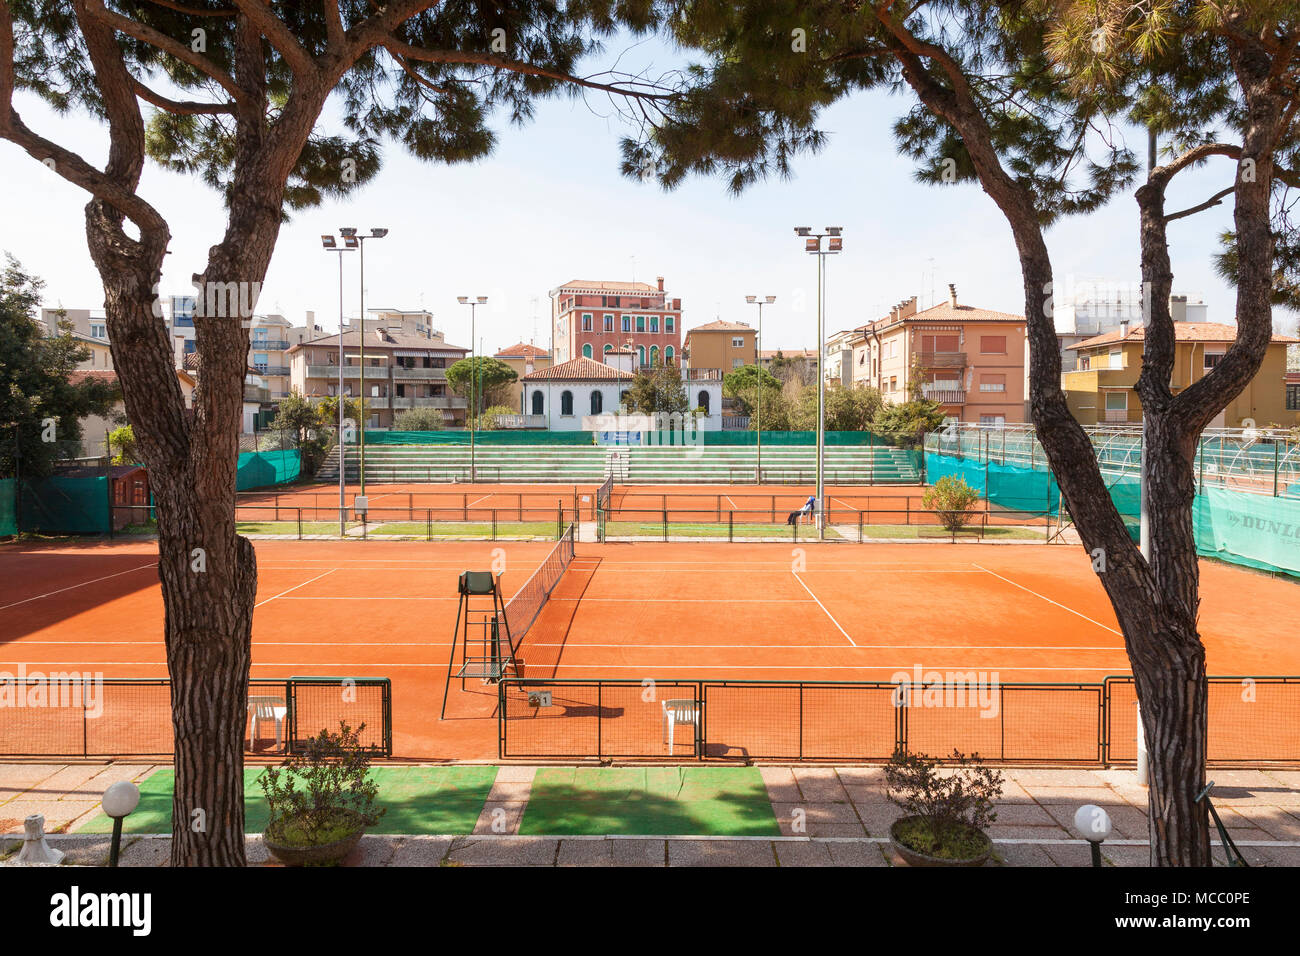 Deserted courts of the Lido Tennis Club, Lido di Venezia (Venice Lido),  Venice, Veneto, Italy with a lone member relaxing in a chair enjoying the  spri Stock Photo - Alamy